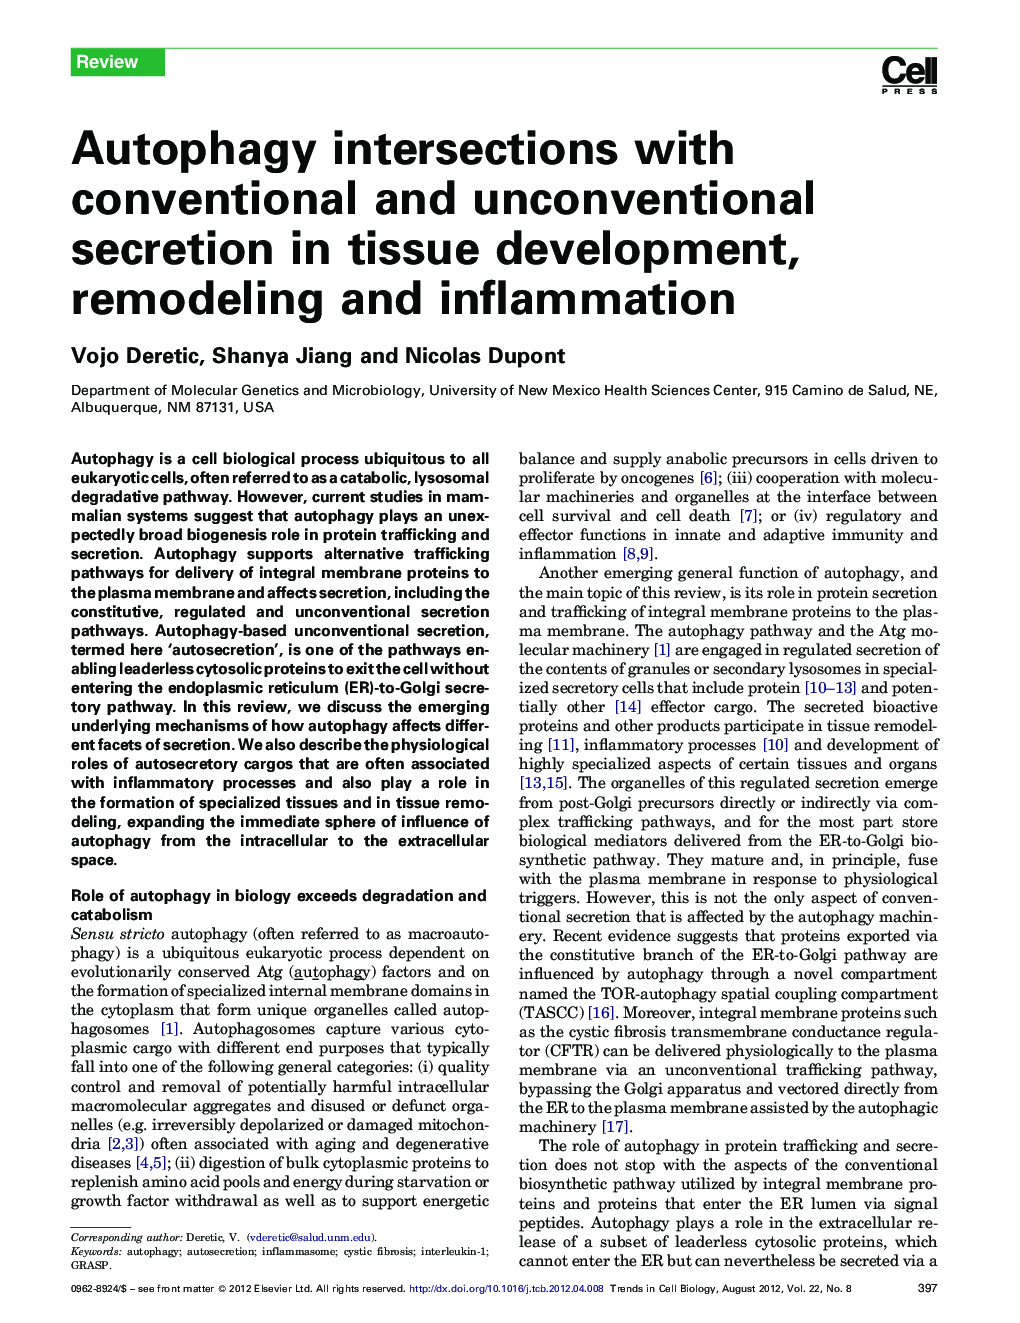 Autophagy intersections with conventional and unconventional secretion in tissue development, remodeling and inflammation